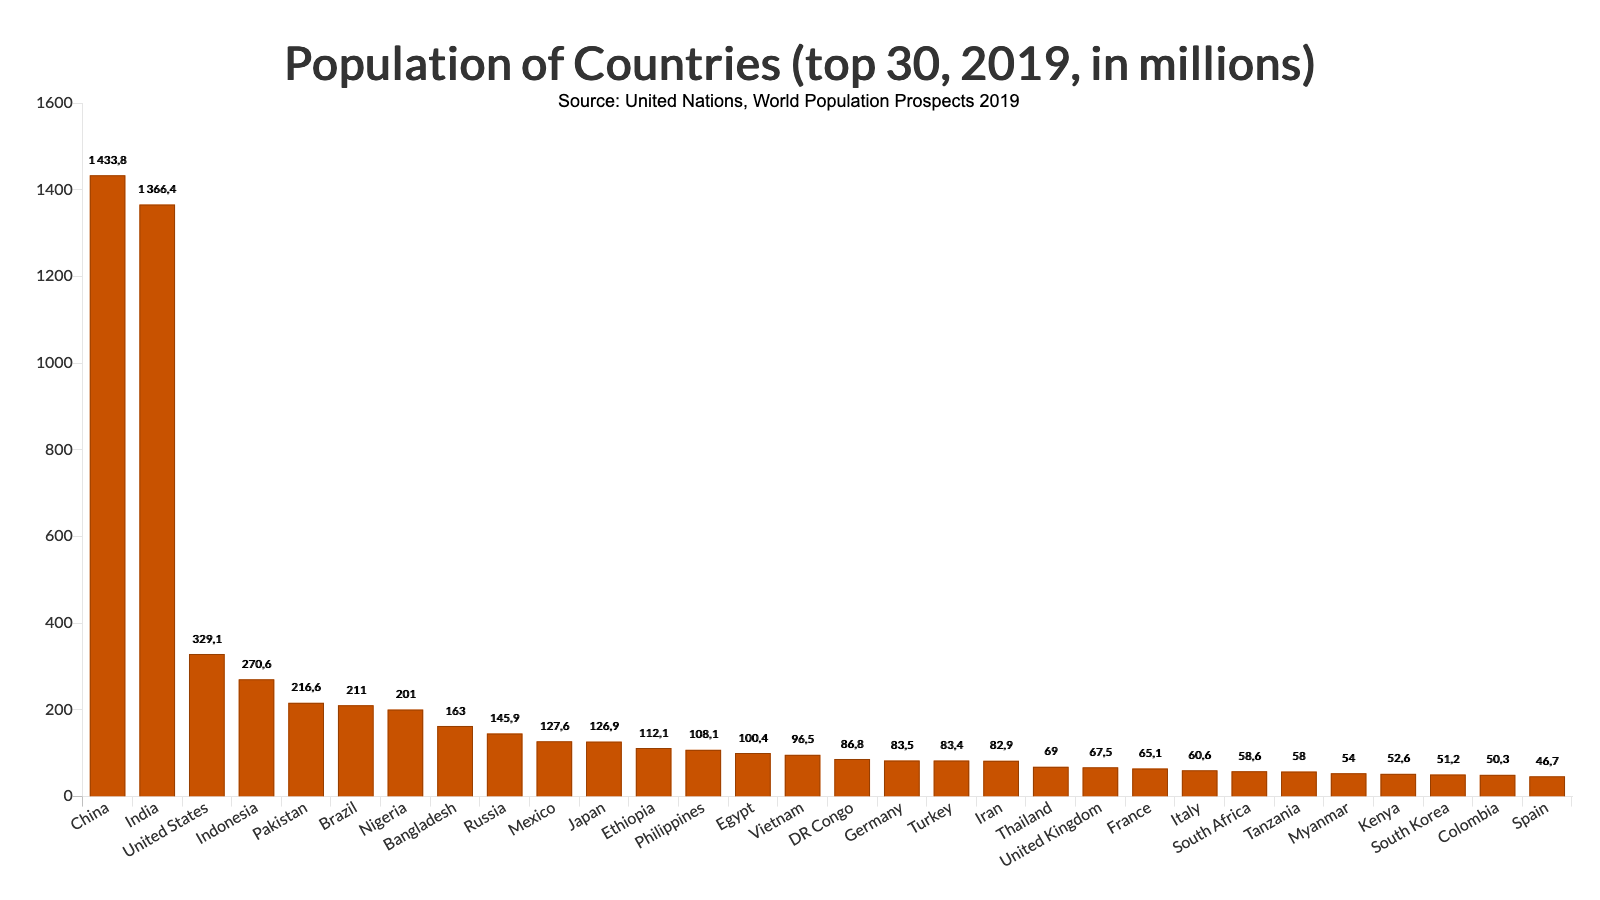 Bar - Population of Countries, 2019